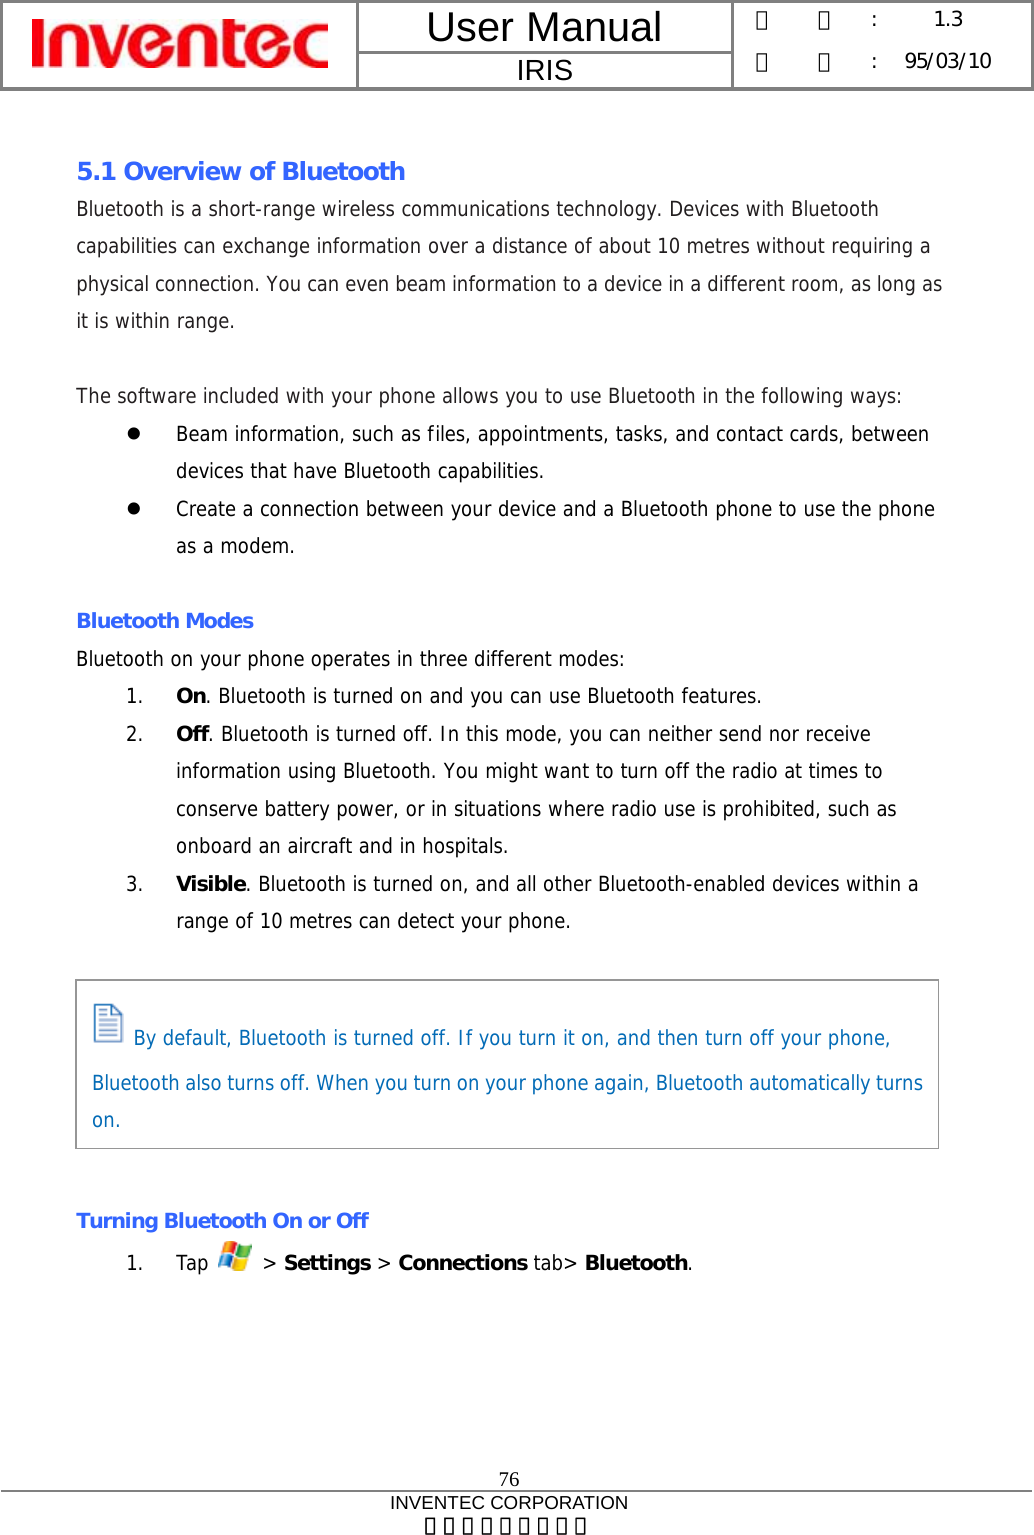 User Manual  IRIS 版    本 :  1.3 日    期 : 95/03/10  76 INVENTEC CORPORATION 英業達股份有限公司   5.1 Overview of Bluetooth Bluetooth is a short-range wireless communications technology. Devices with Bluetooth capabilities can exchange information over a distance of about 10 metres without requiring a physical connection. You can even beam information to a device in a different room, as long as it is within range.  The software included with your phone allows you to use Bluetooth in the following ways: z Beam information, such as files, appointments, tasks, and contact cards, between devices that have Bluetooth capabilities. z Create a connection between your device and a Bluetooth phone to use the phone as a modem.  Bluetooth Modes Bluetooth on your phone operates in three different modes: 1. On. Bluetooth is turned on and you can use Bluetooth features. 2. Off. Bluetooth is turned off. In this mode, you can neither send nor receive information using Bluetooth. You might want to turn off the radio at times to conserve battery power, or in situations where radio use is prohibited, such as onboard an aircraft and in hospitals. 3. Visible. Bluetooth is turned on, and all other Bluetooth-enabled devices within a range of 10 metres can detect your phone.        Turning Bluetooth On or Off 1. Tap   &gt; Settings &gt; Connections tab&gt; Bluetooth.  By default, Bluetooth is turned off. If you turn it on, and then turn off your phone, Bluetooth also turns off. When you turn on your phone again, Bluetooth automatically turns on. 